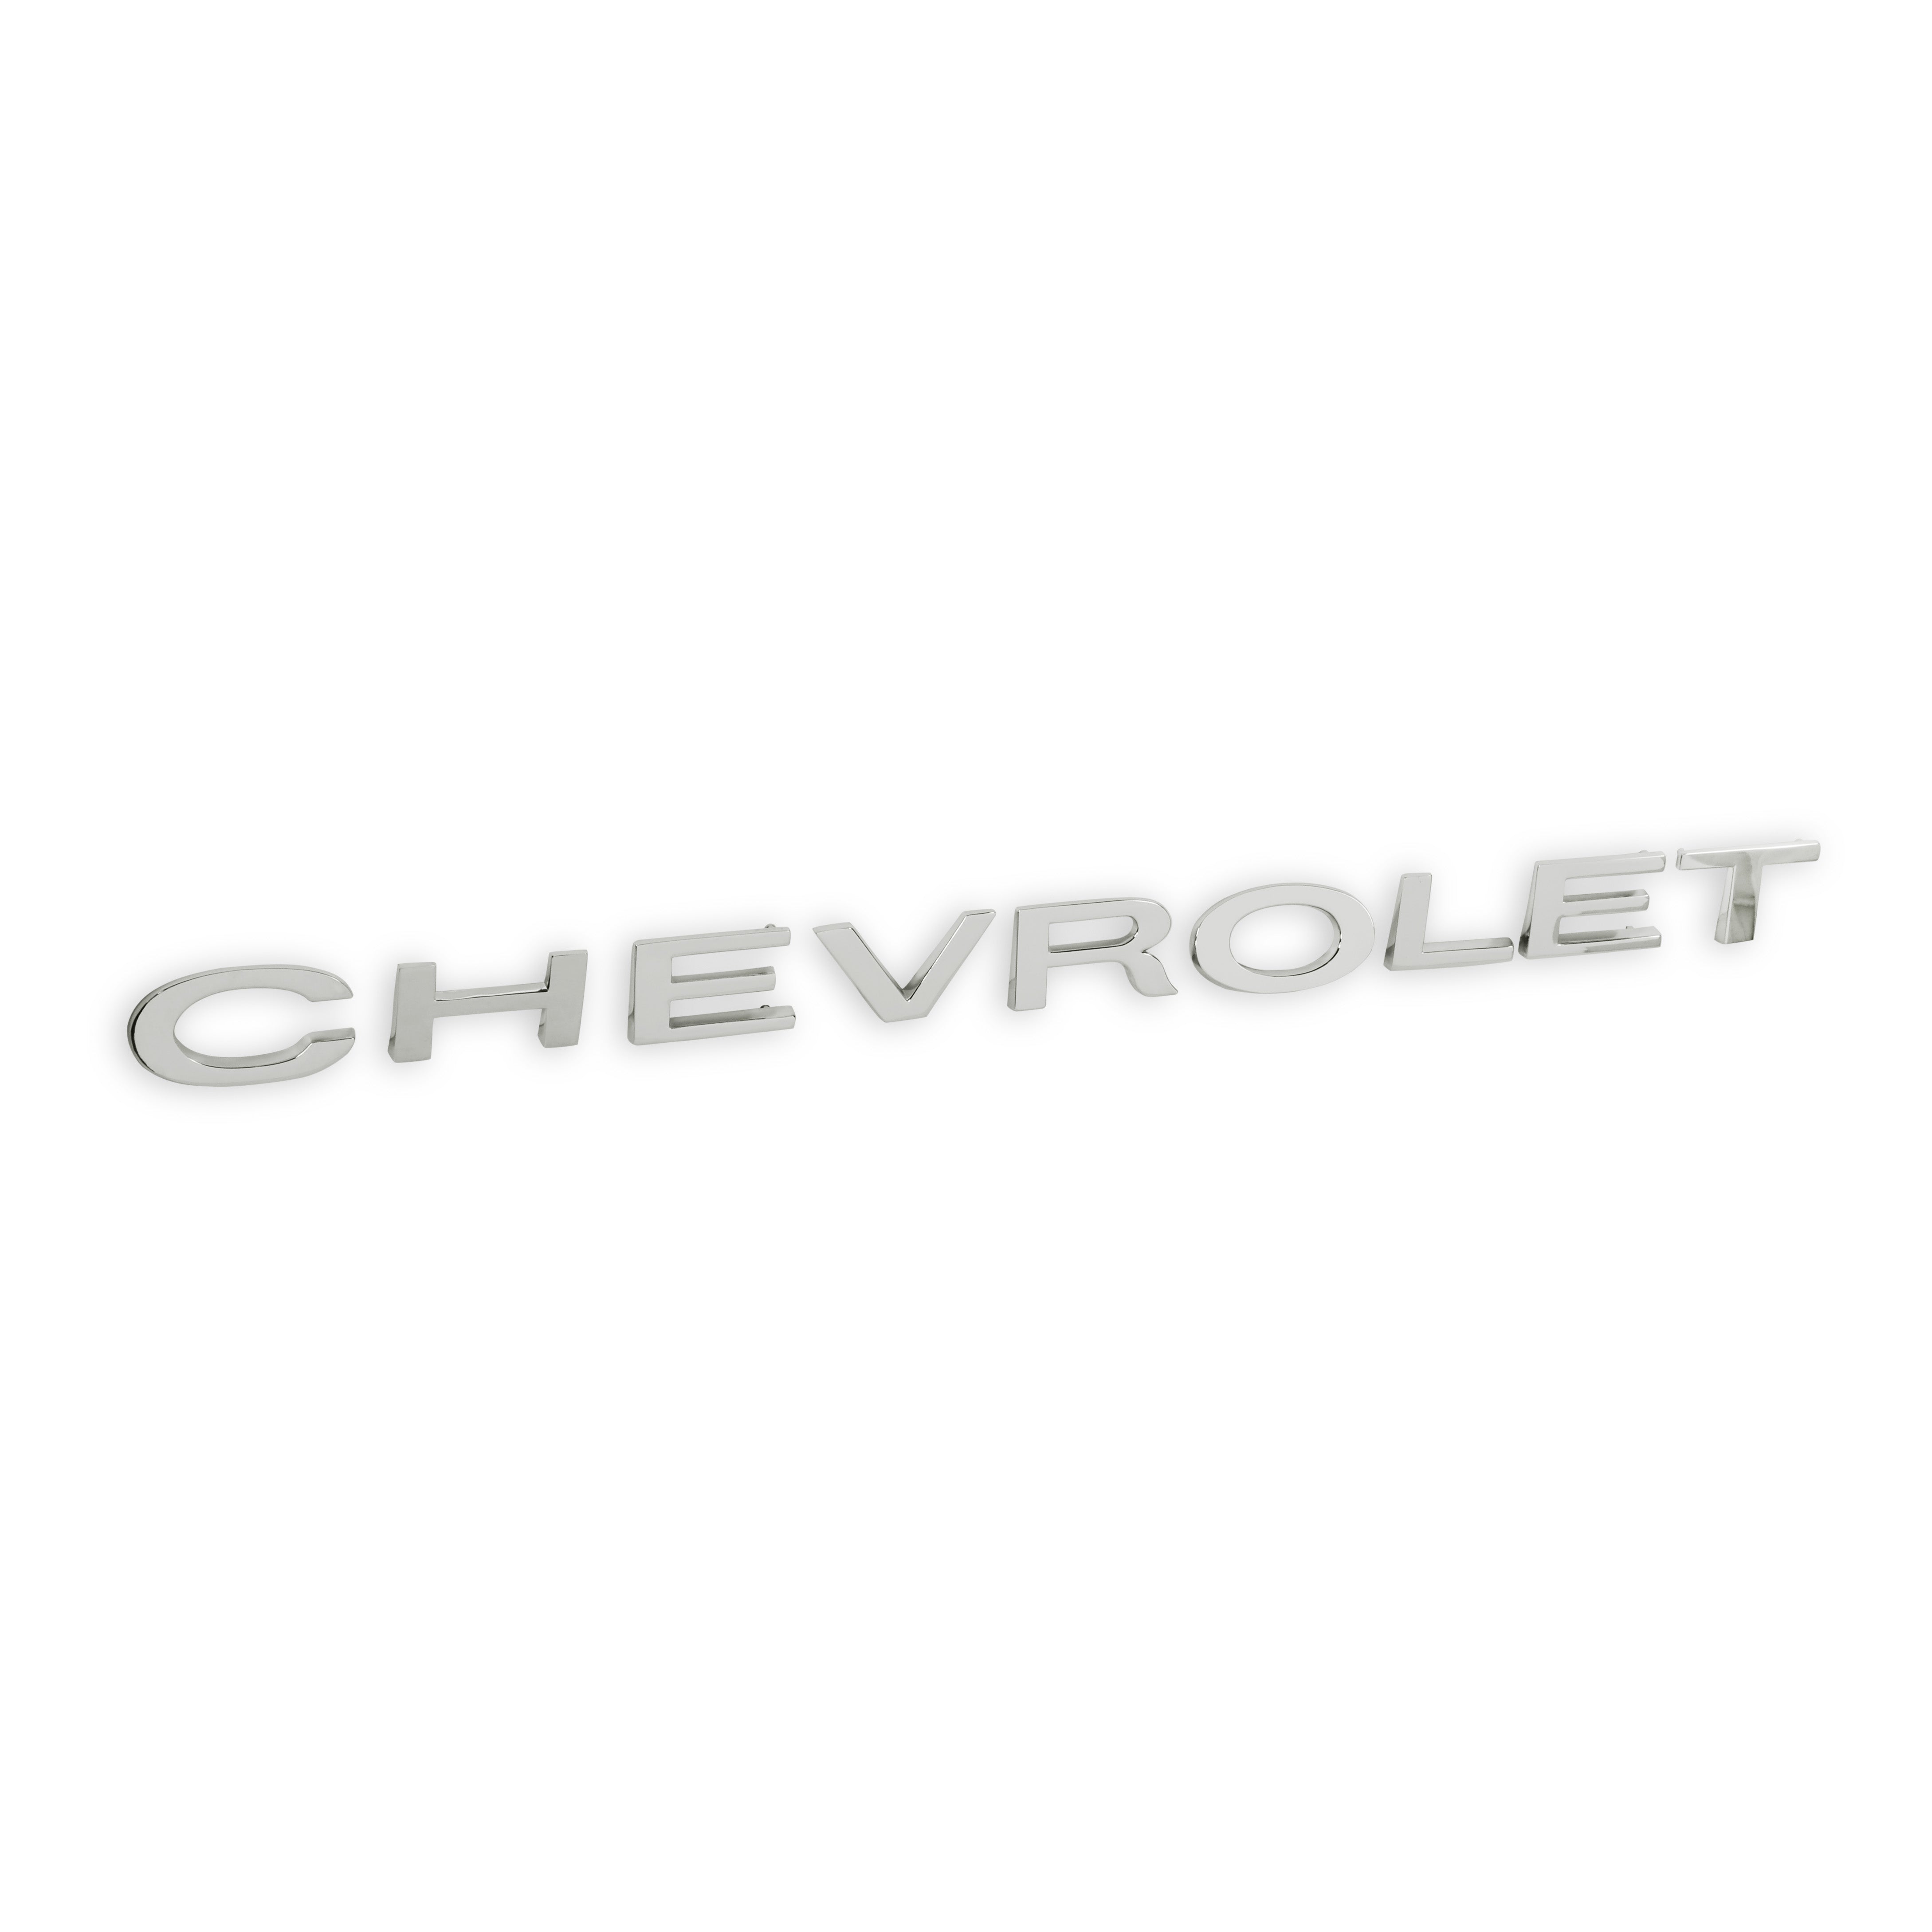 BROTHERS C/K Tailgate Letters - CHEVROLET pn 04-587